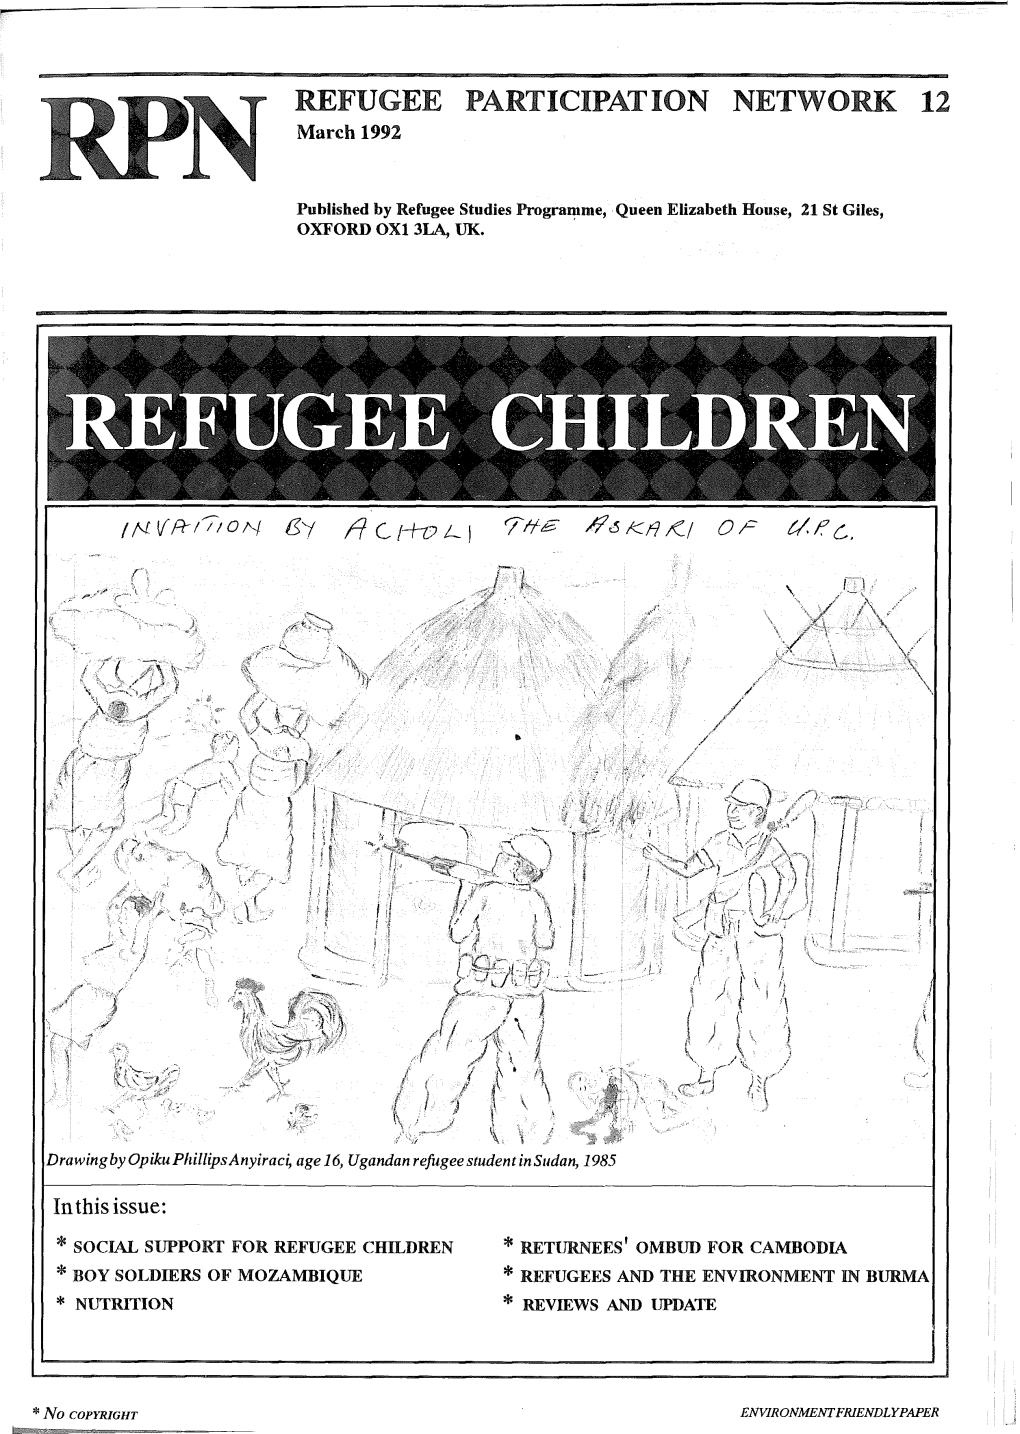 REFUGEE PARTICIPATION NETWORK 12 March 1992